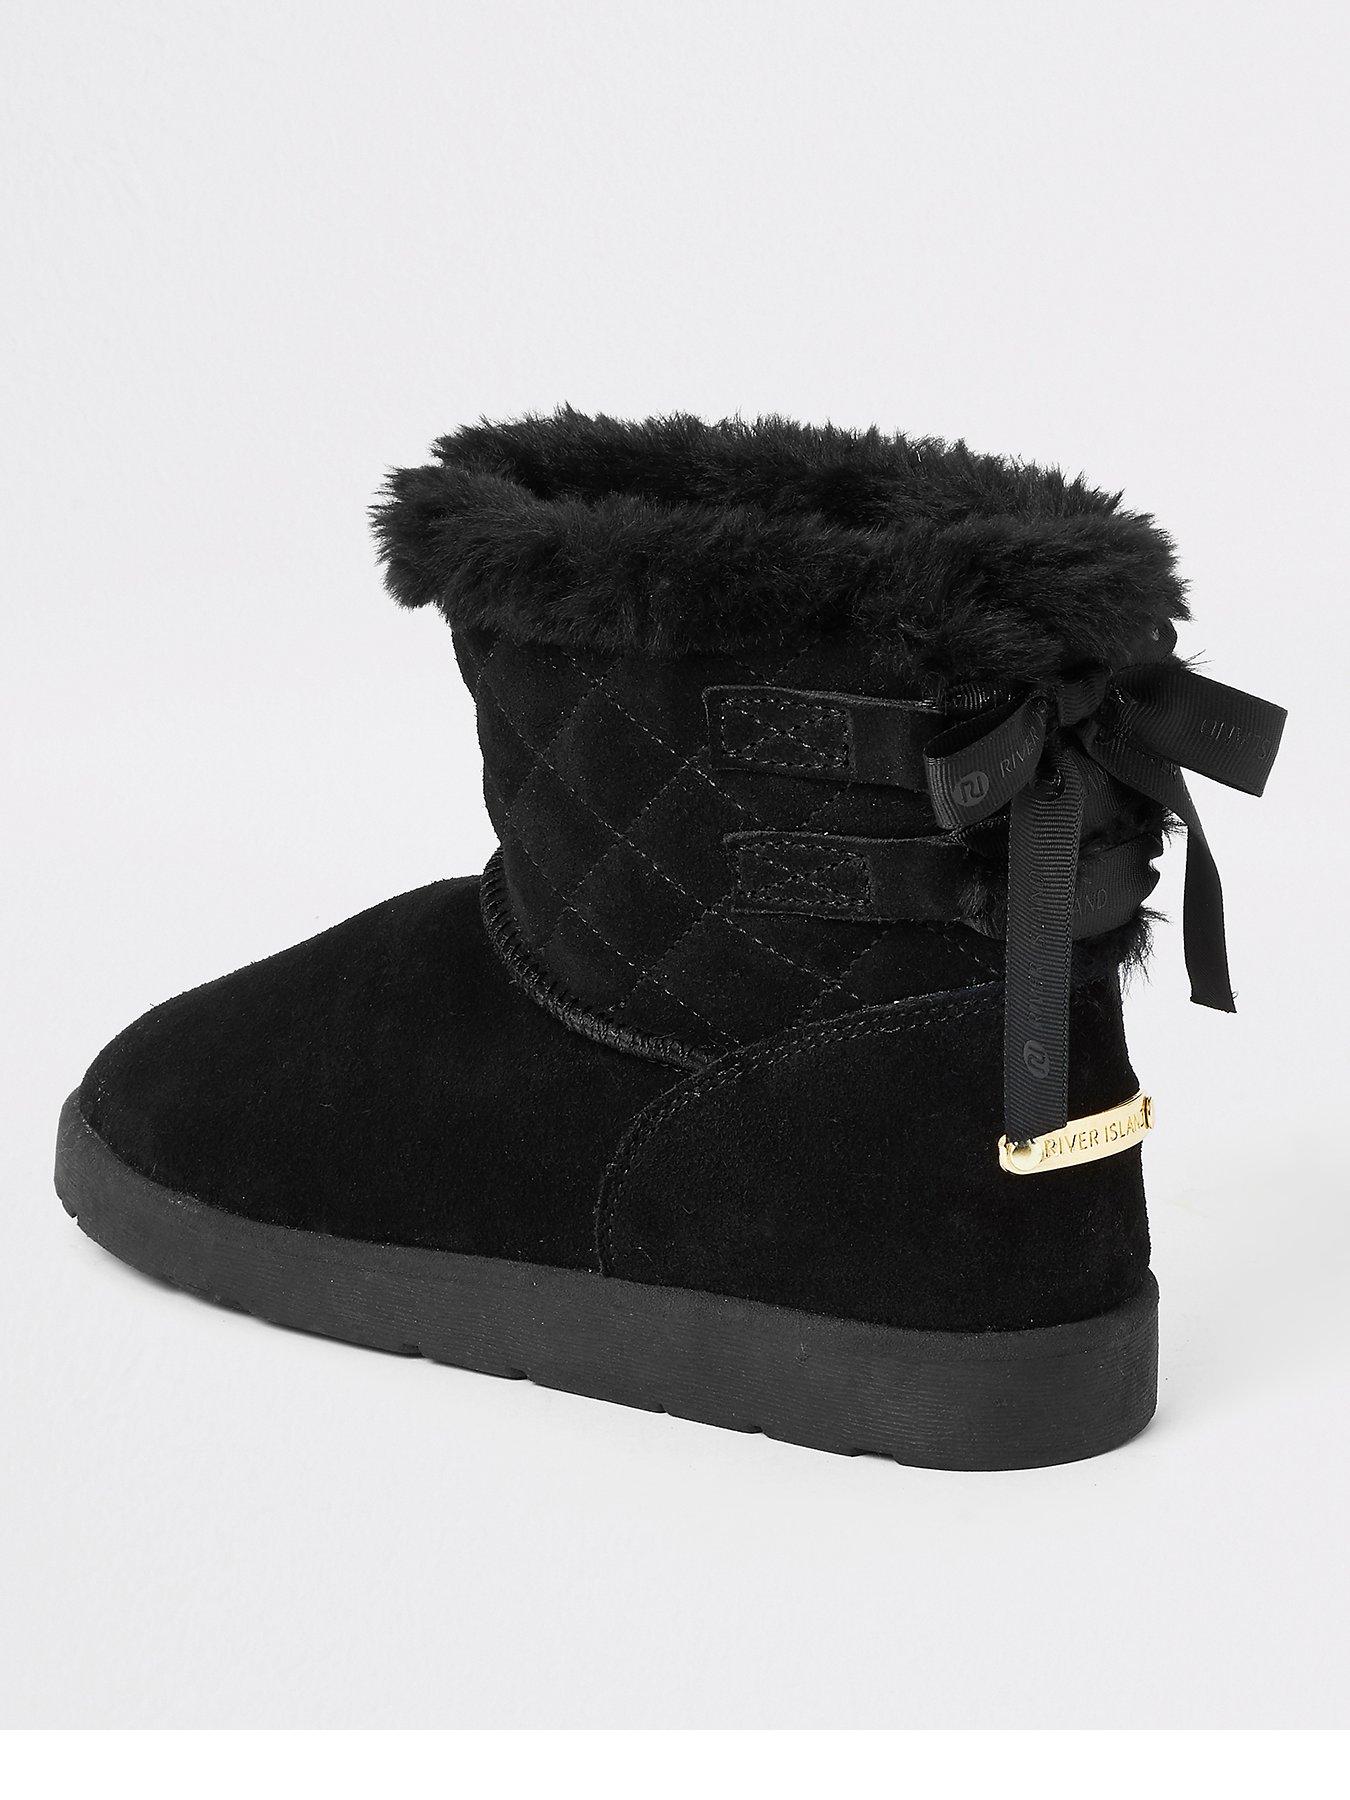 river island ankle ugg boots 